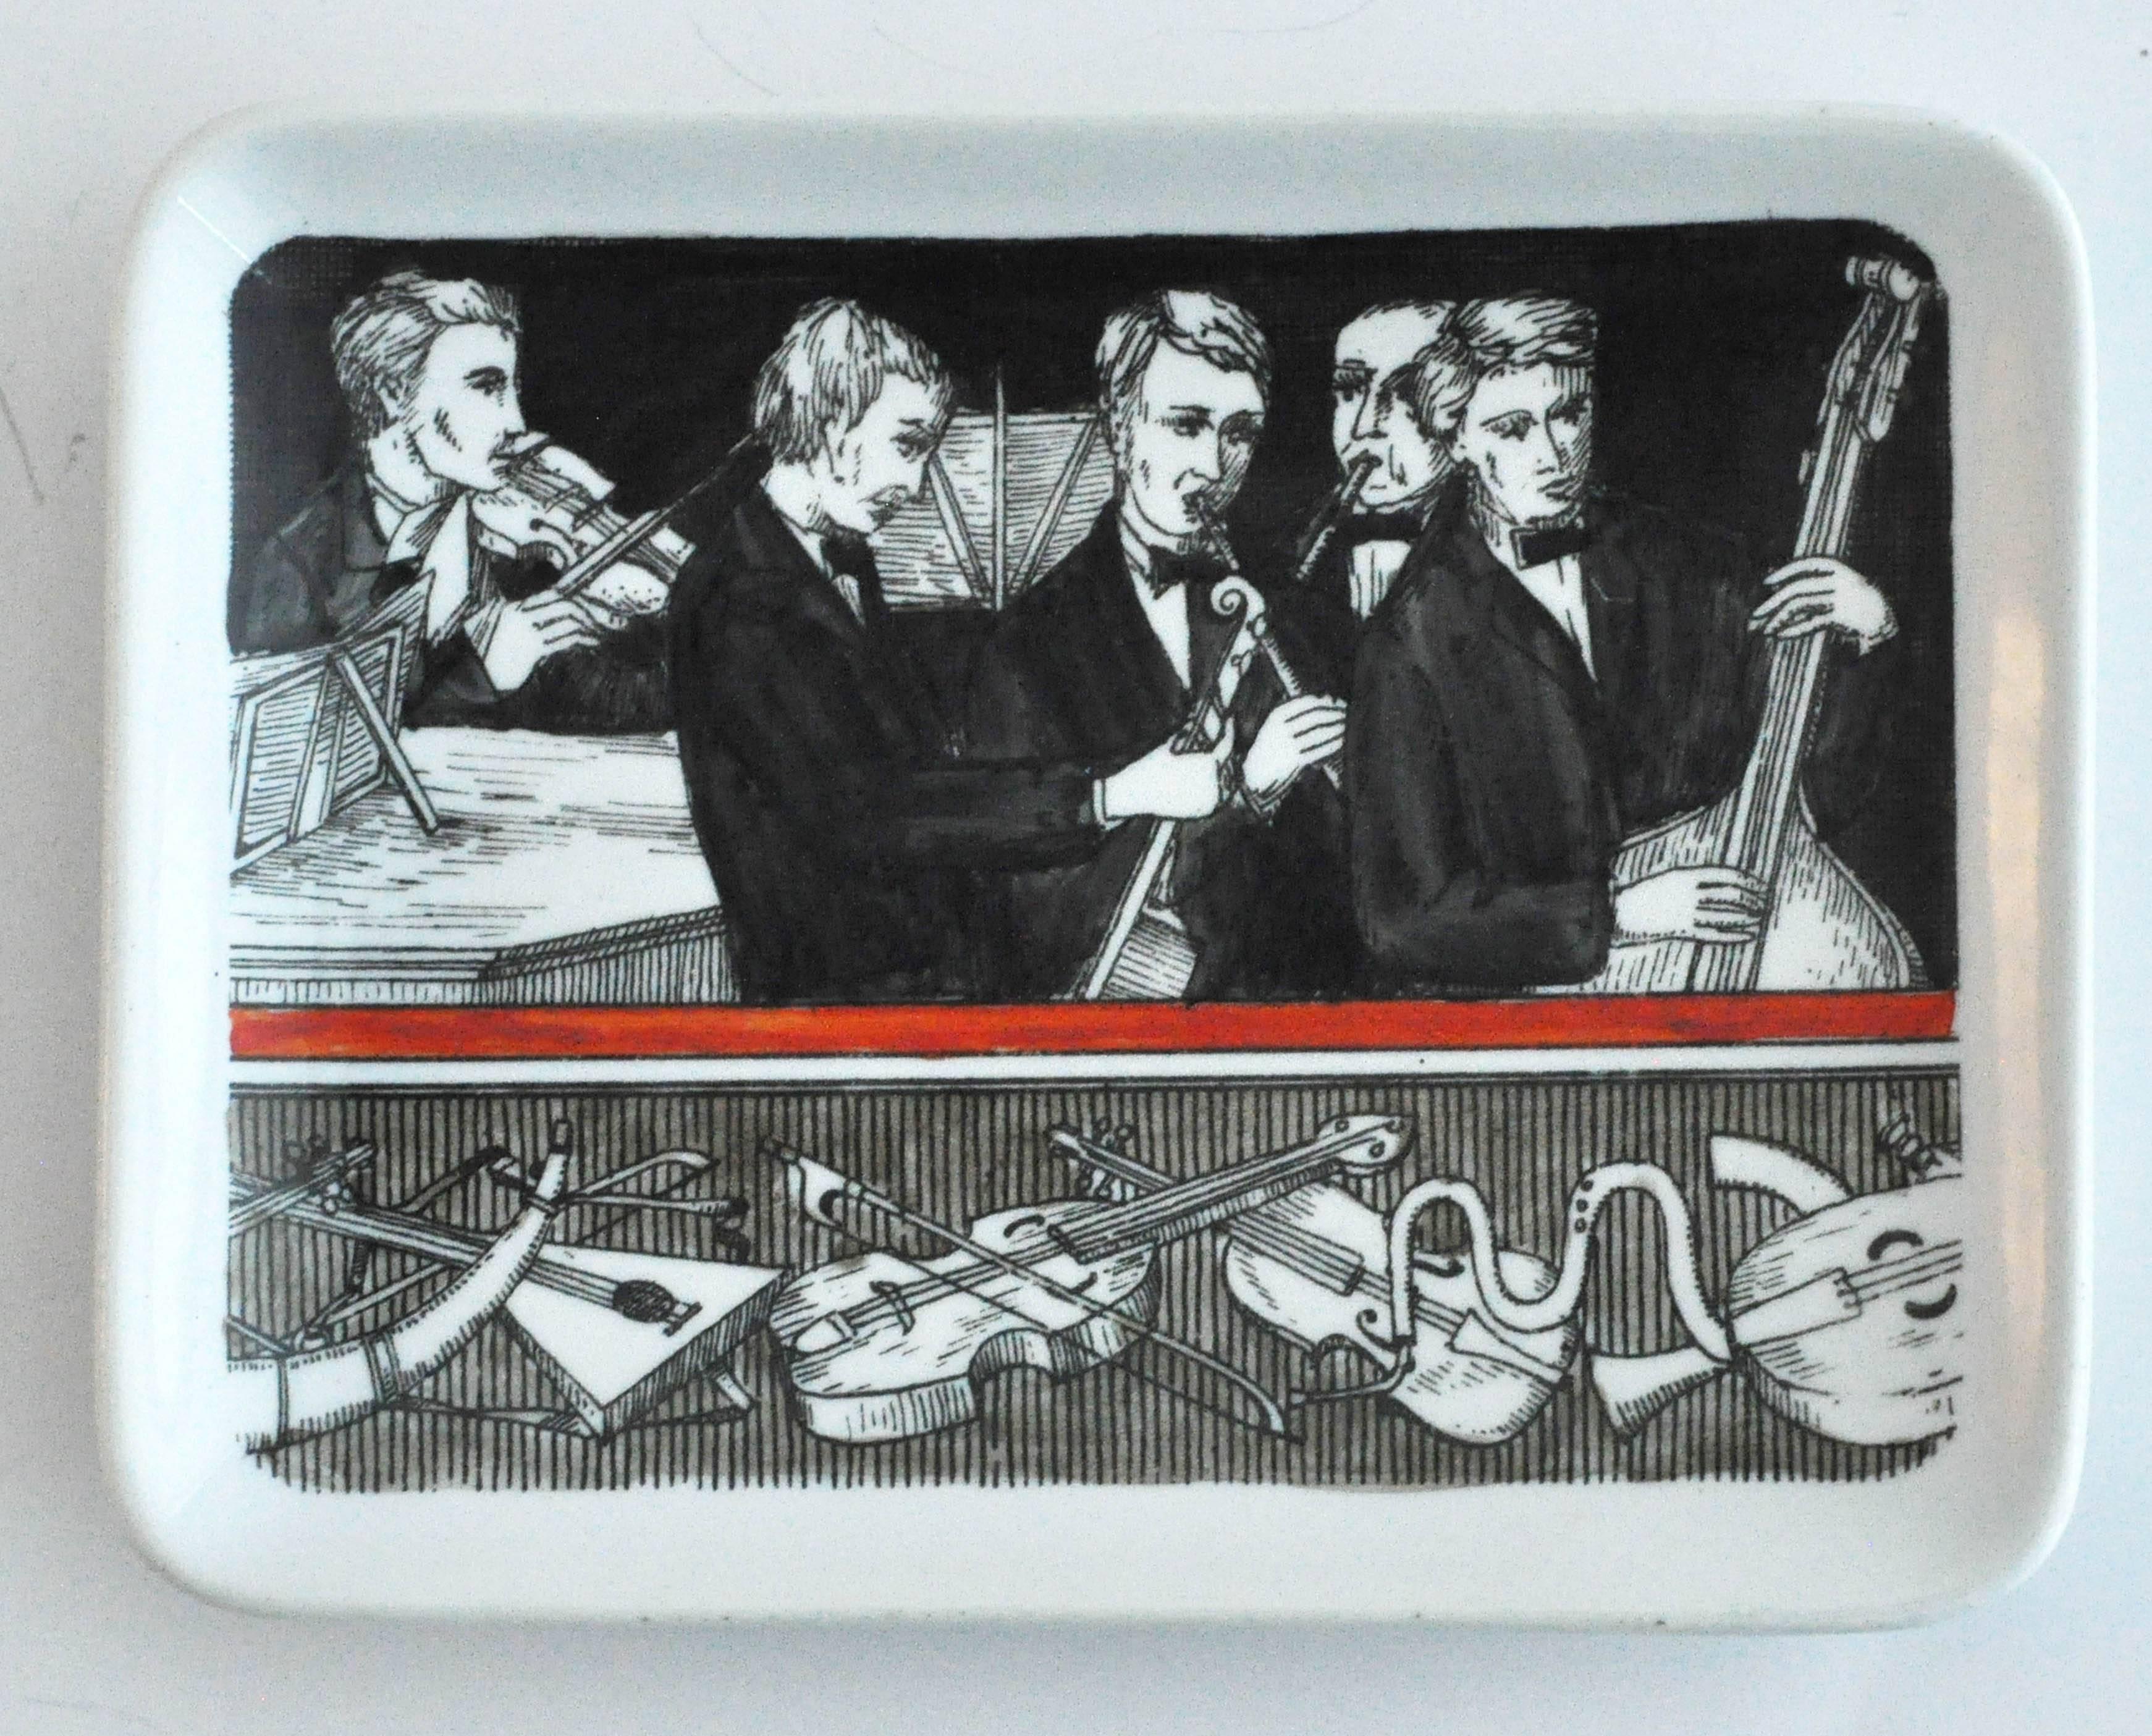 A vintage ceramic pin dish by Piero Fornasetti for Rosenfeld Imports, depicting musicians and their instruments. Comprised of two horizontal decorative panels, the design recalls the visual style of ancient Greek pottery, one of Fornasetti's many